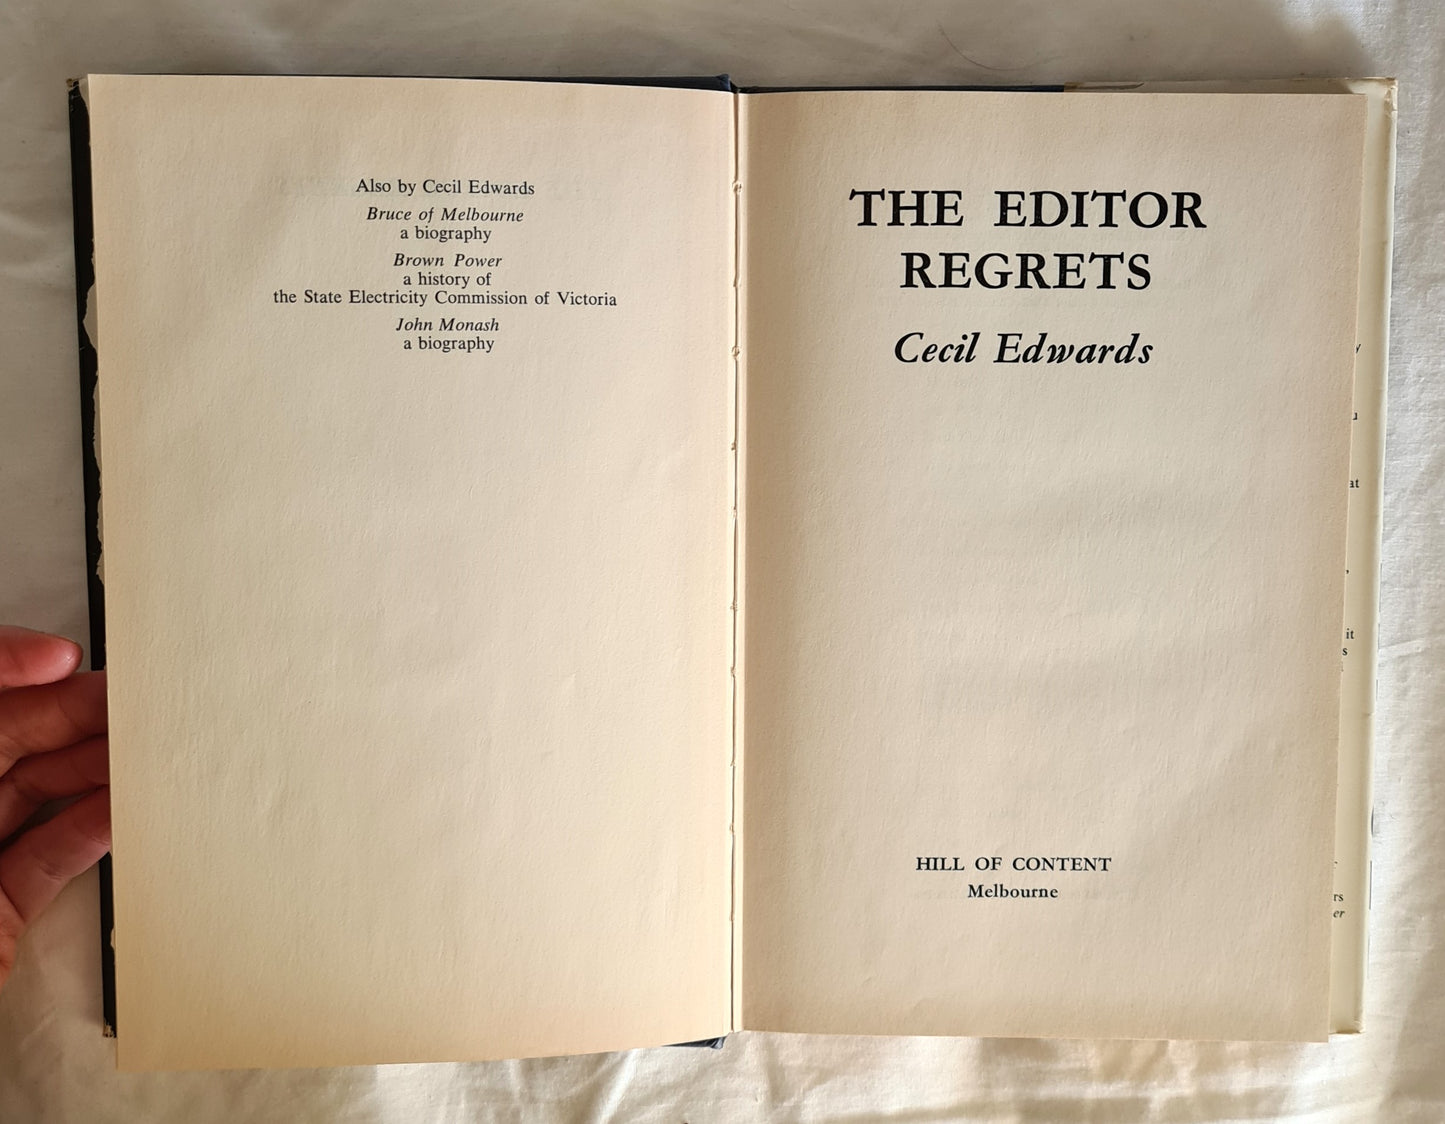 The Editor Regrets by Cecil Edwards